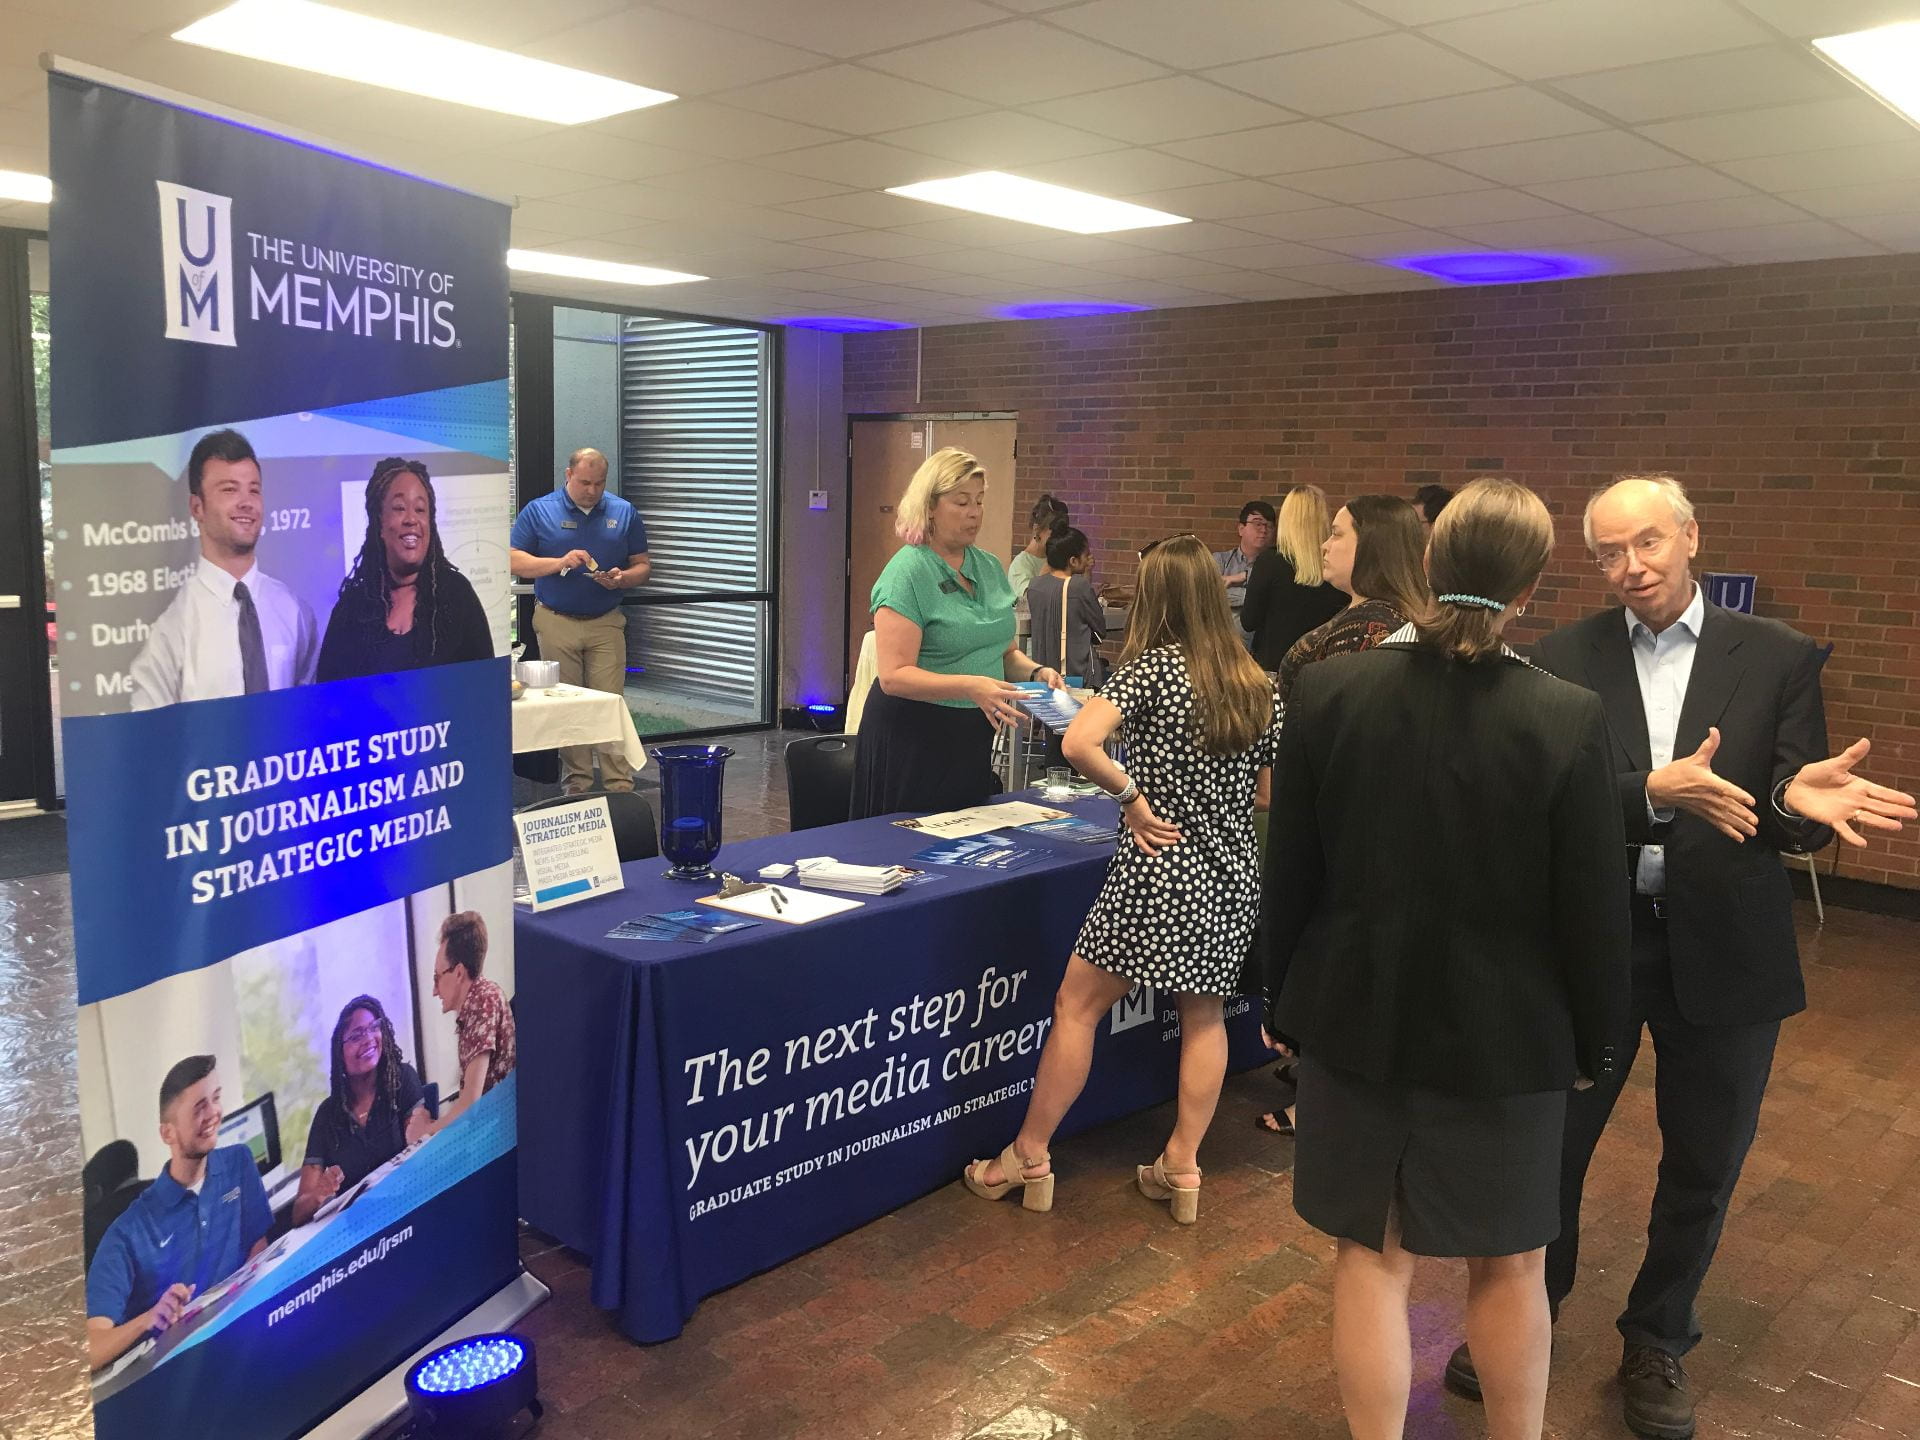 David Arant, chair of Journalism and Strategic Media, discusses graduate programs with UofM Graduate School Dean Robin Poston at an informational open house on July 23 in the Meeman Journalism Building.